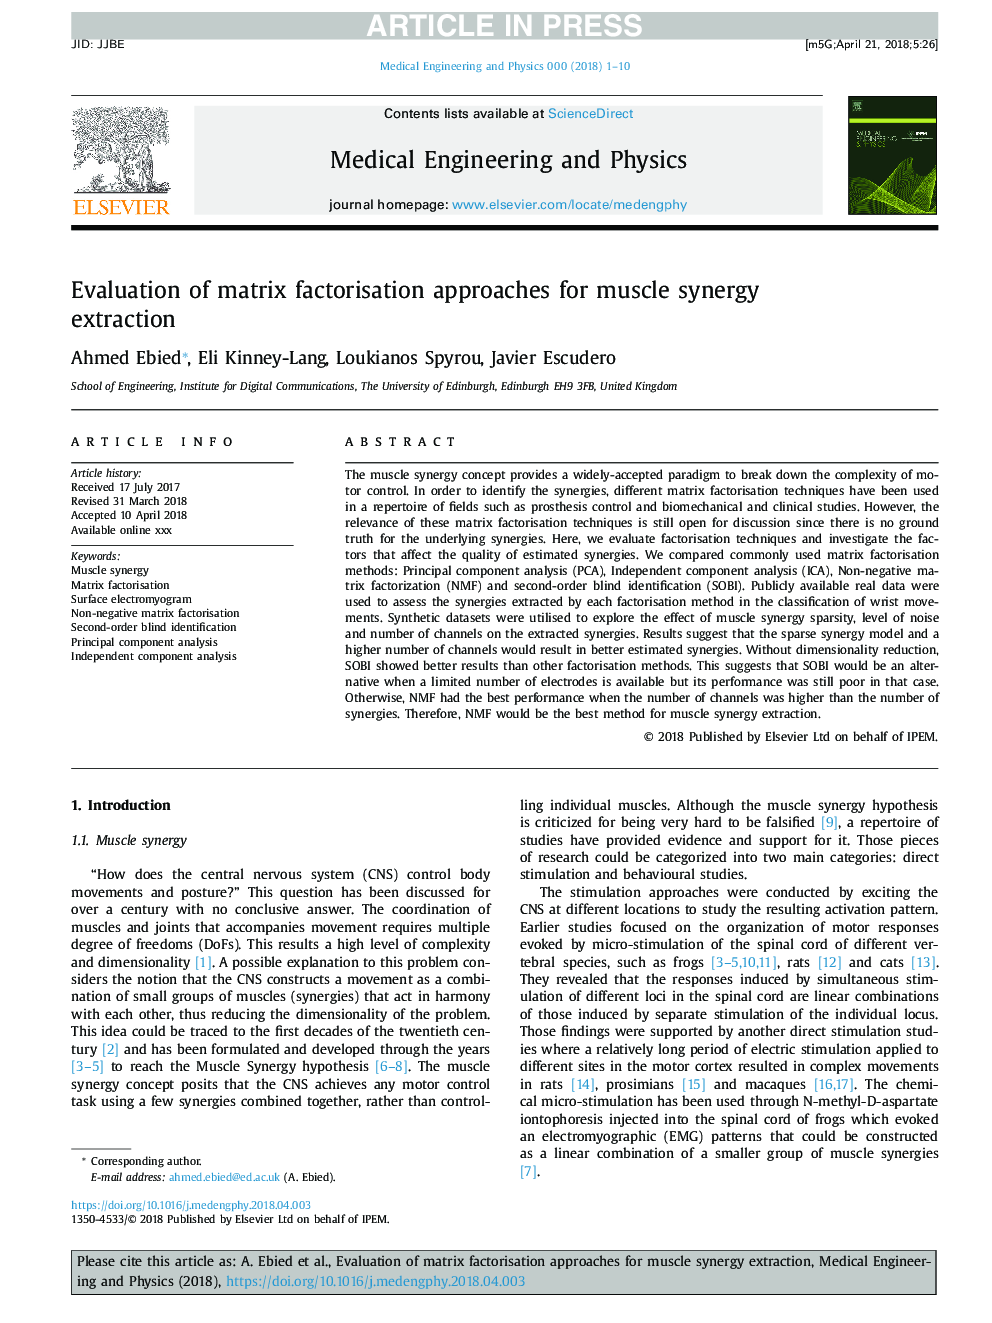 Evaluation of matrix factorisation approaches for muscle synergy extraction